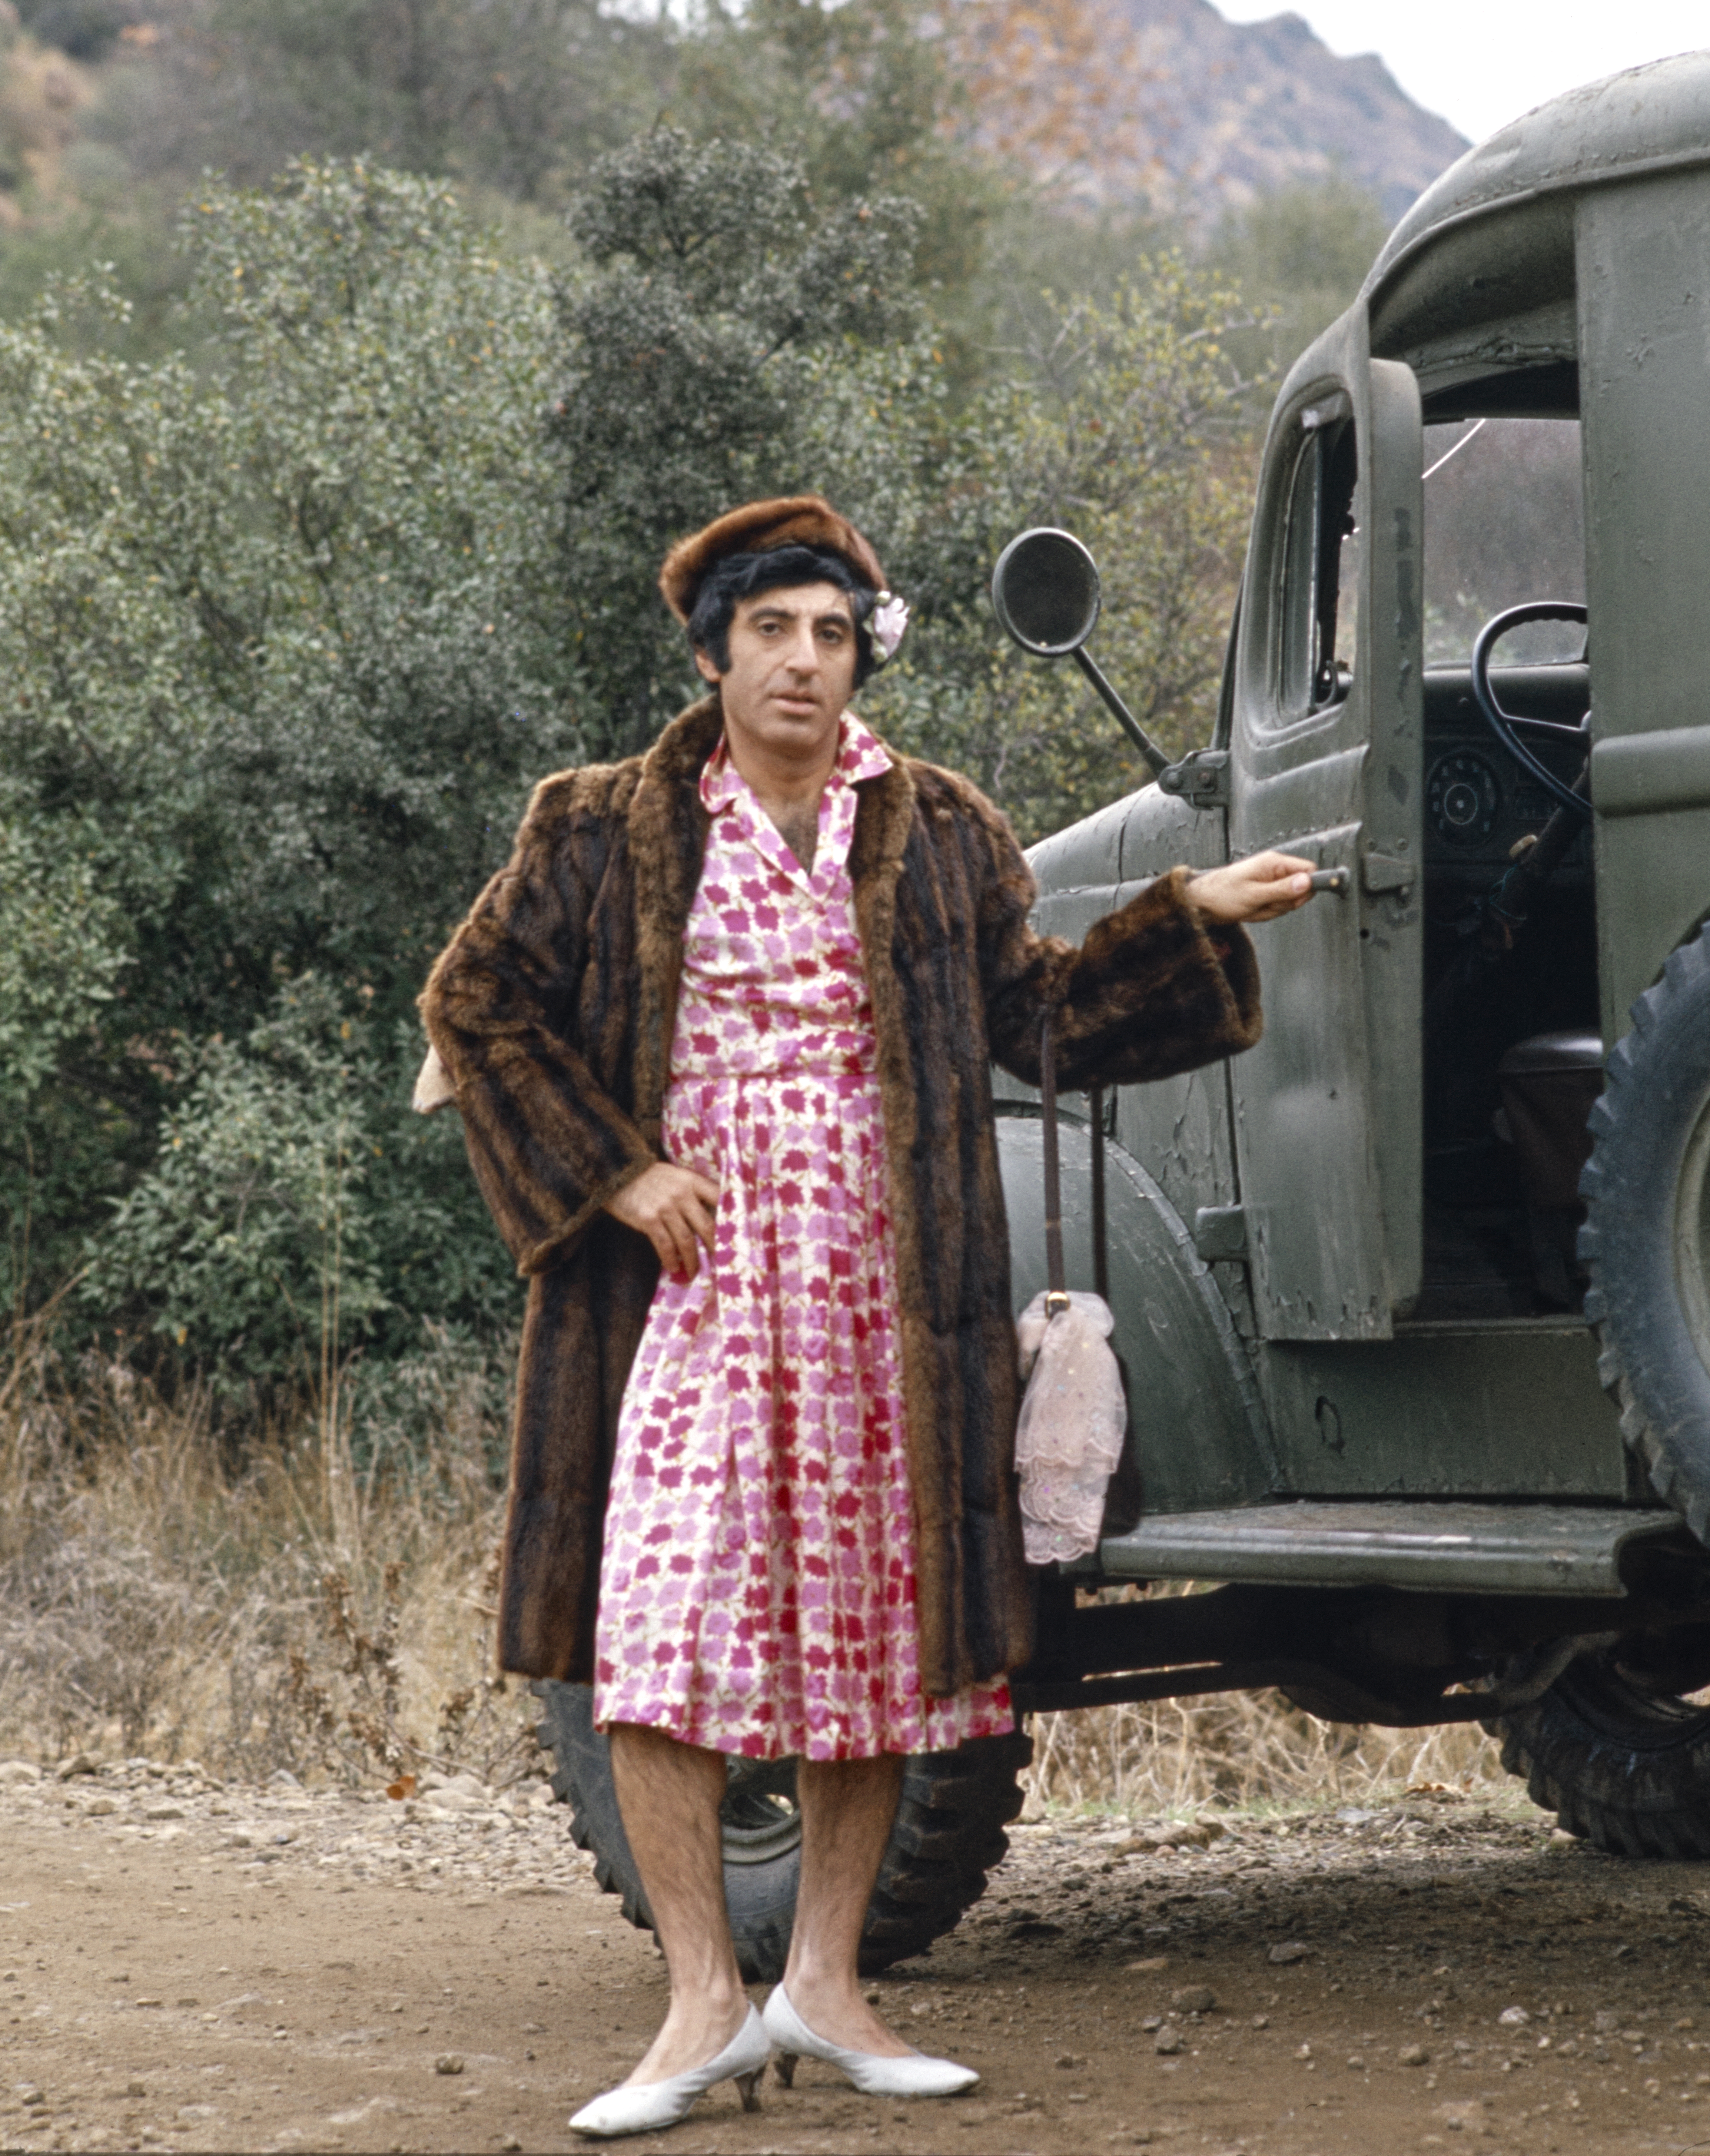 Jamie Farr as Maxwell Q. Klinger on "M*A*S*H" on March 15, 1977. | Source: Getty Images